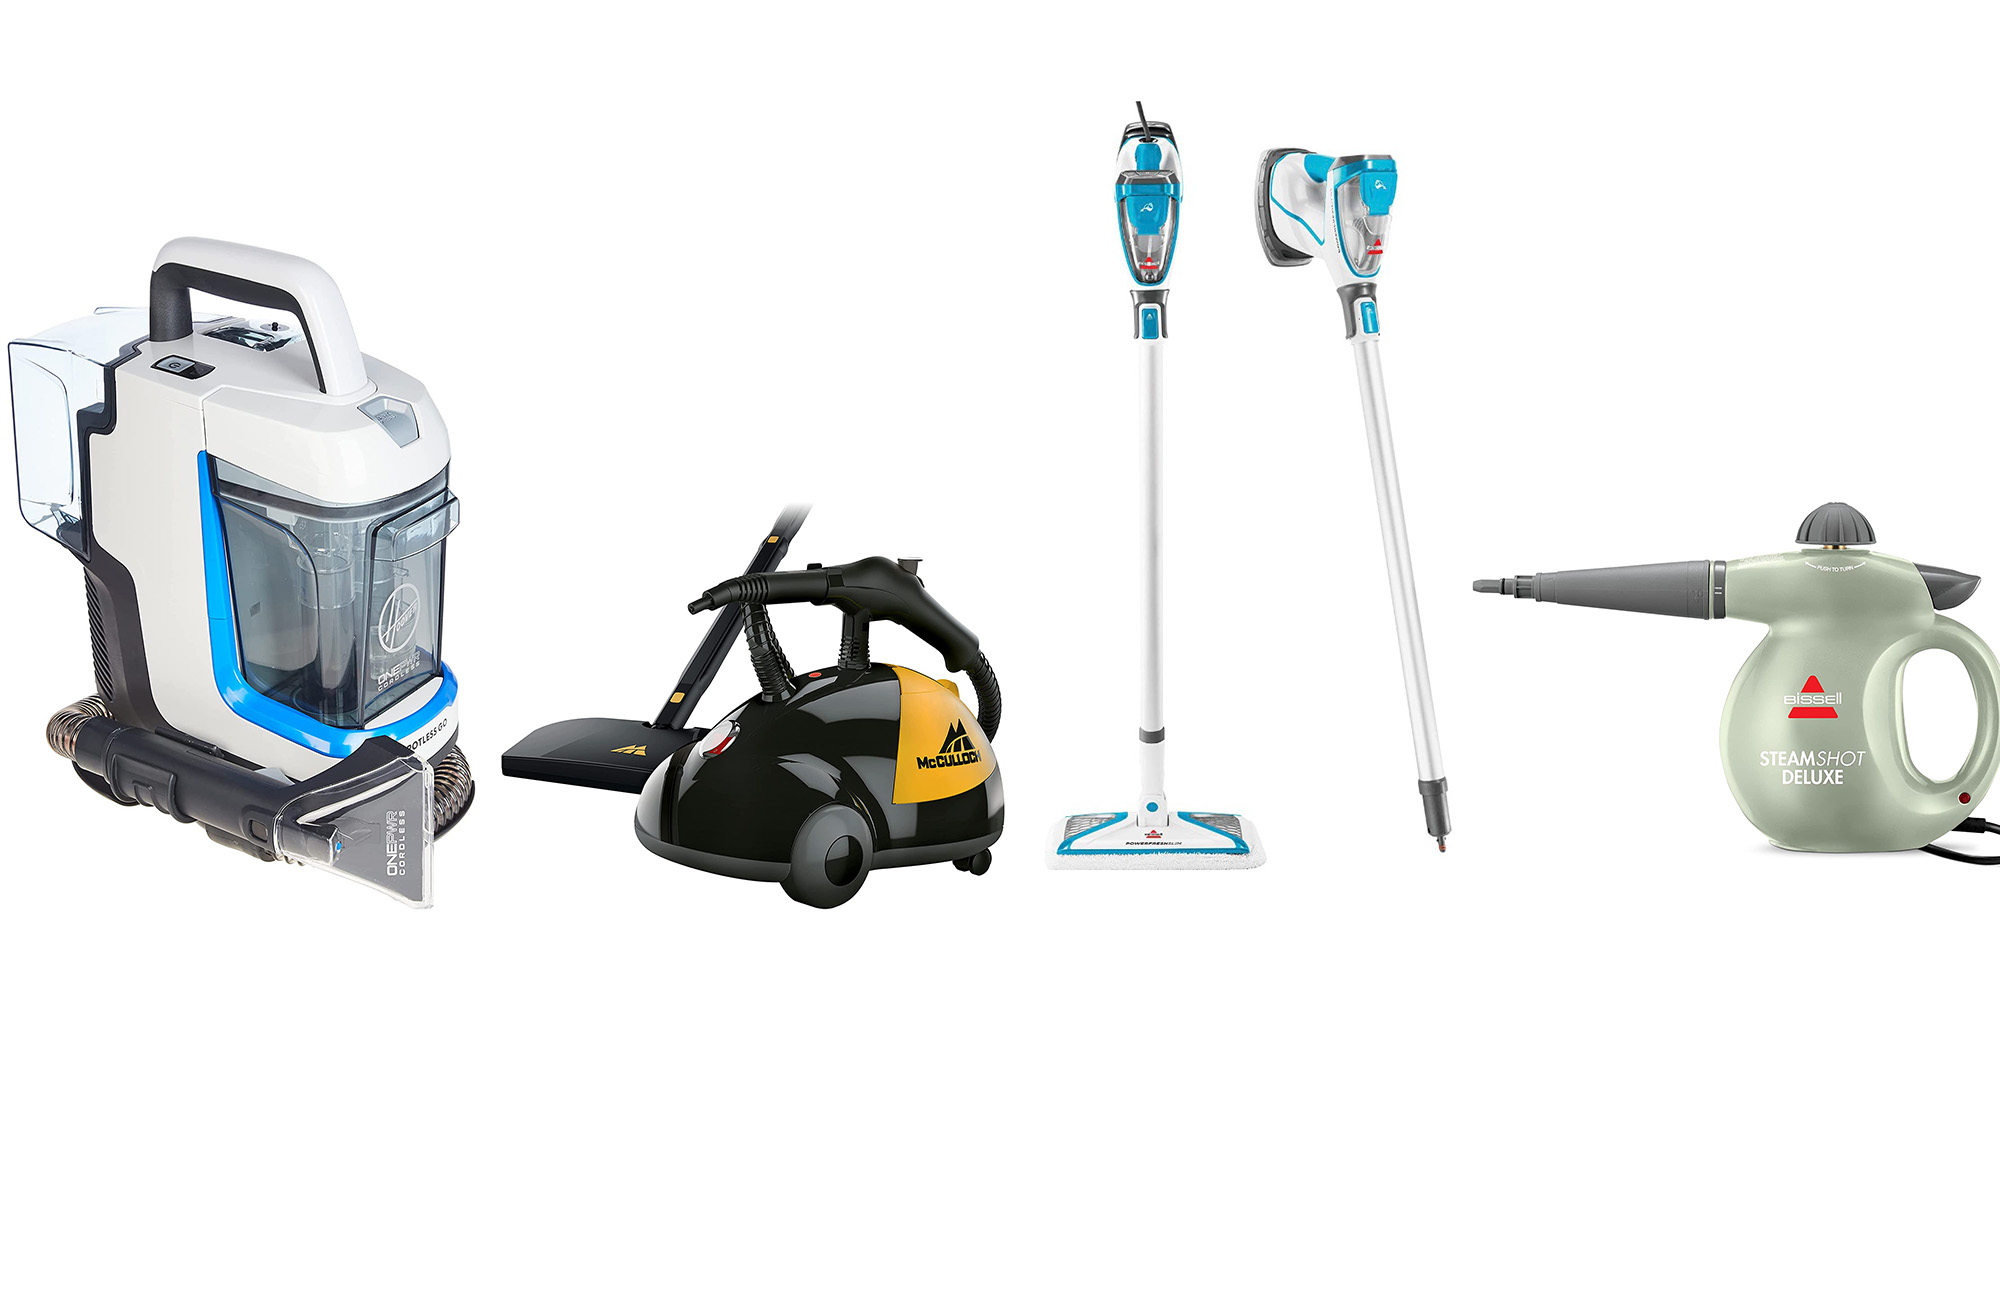 The Best Steam Cleaners for Every Job in 2023, HGTV Top Picks